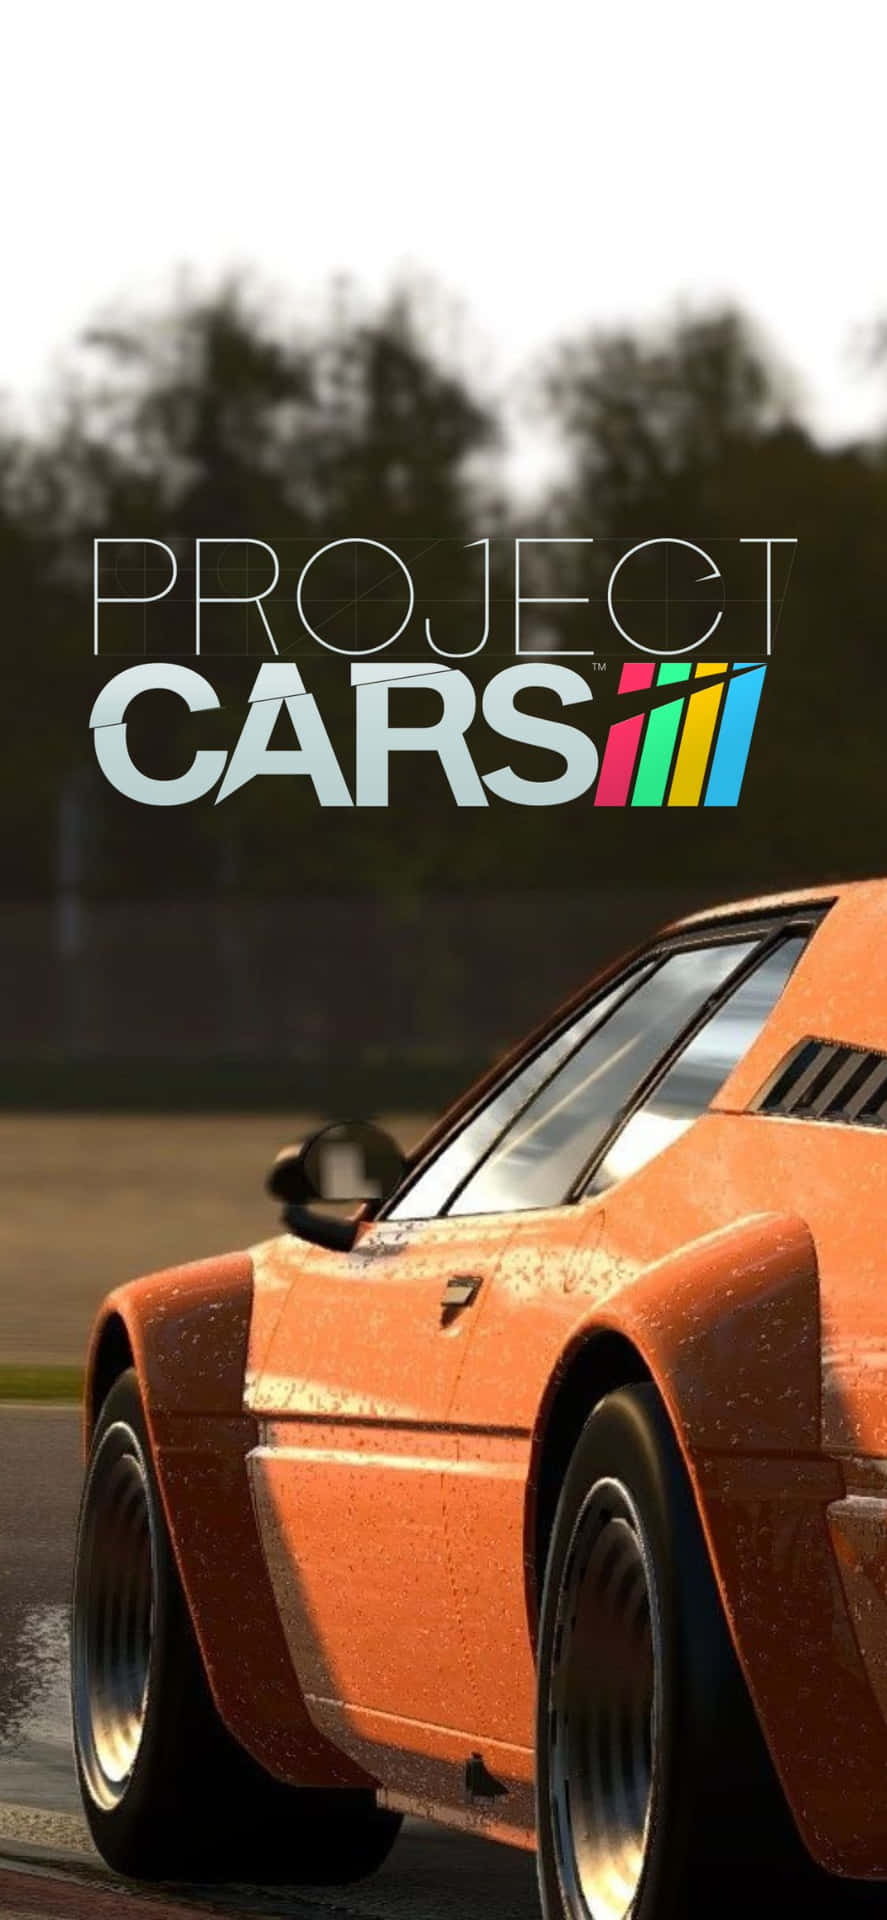 Get behind the wheel of one of the newest project cars with your Iphone XS.